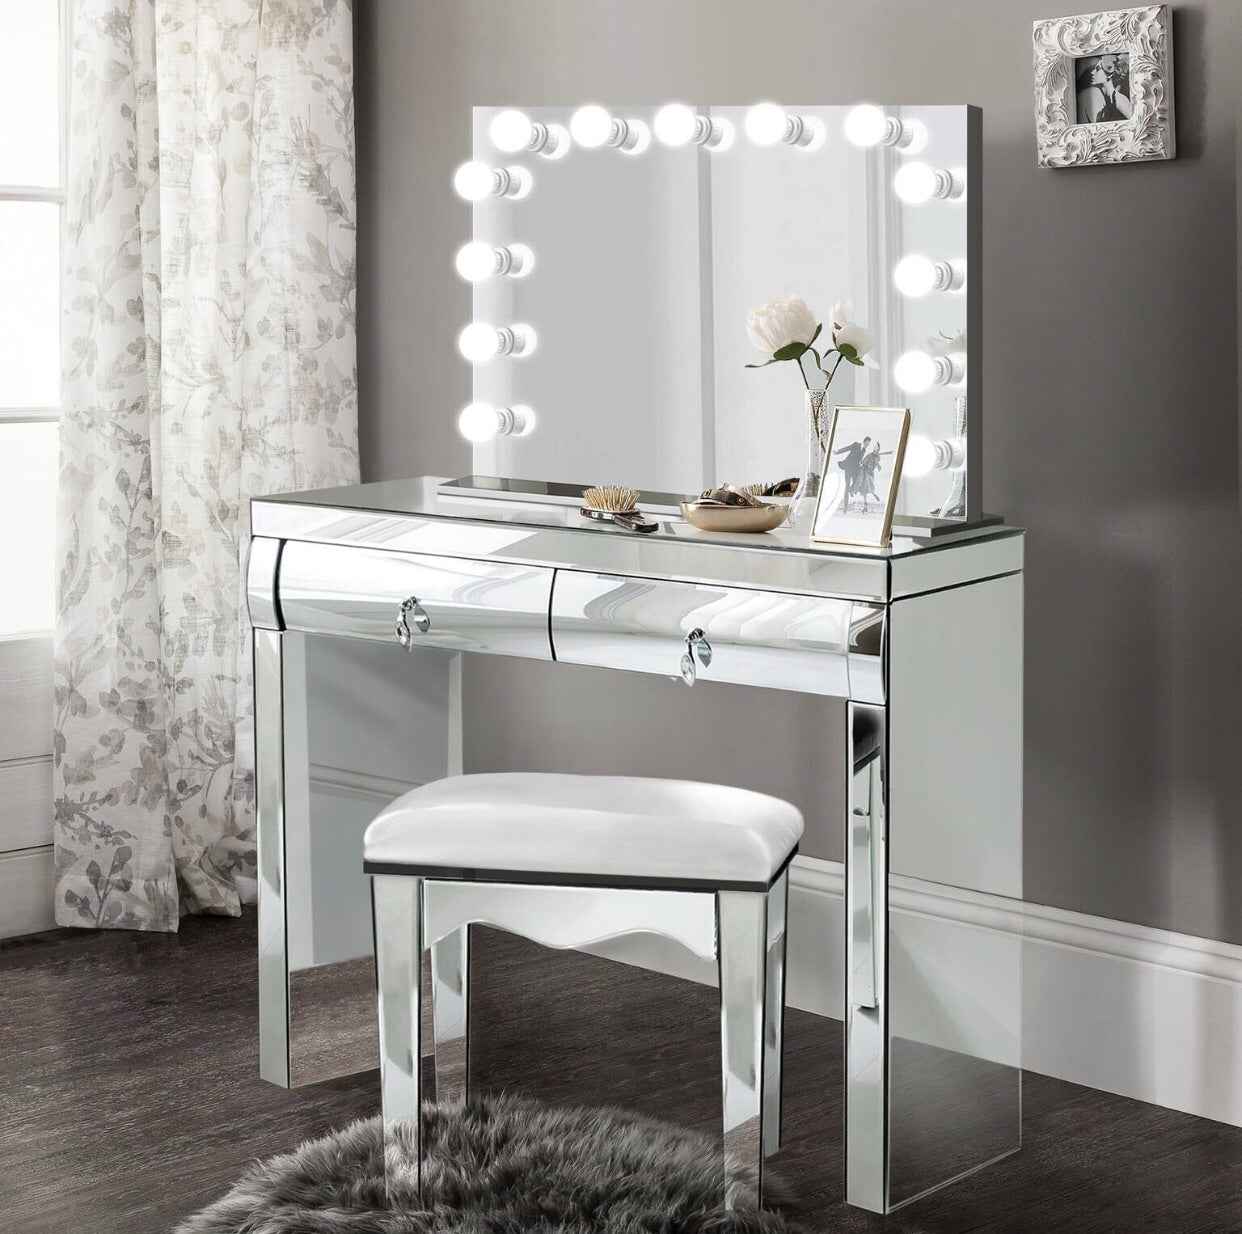 Complete Set Mirrored Dimmable Hollywood Makeup Mirror Led Built I